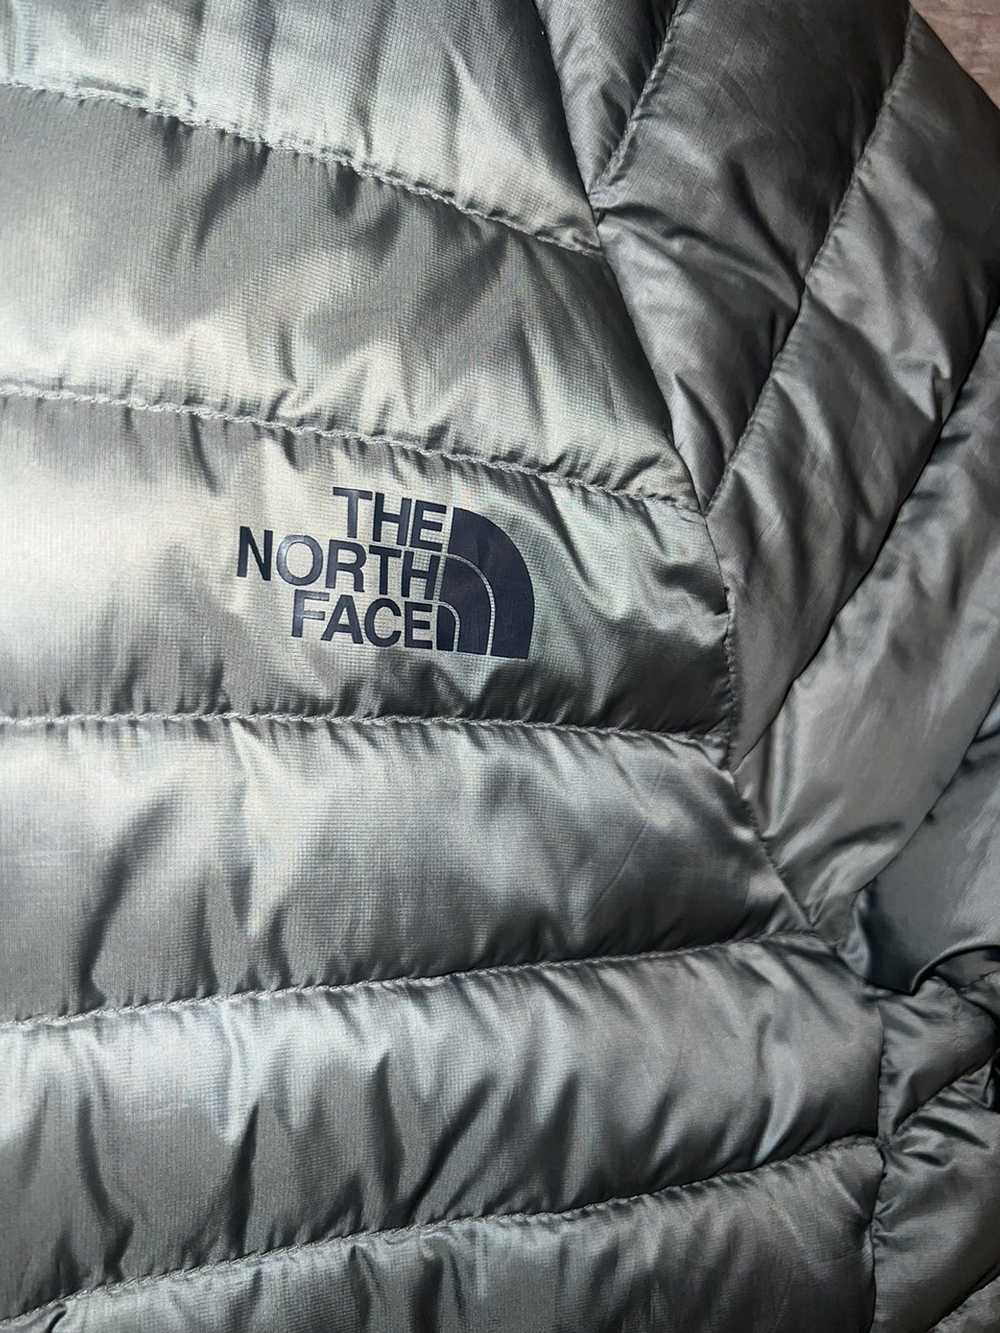 The North Face The North Face x Gray Bubble Jacket - image 2